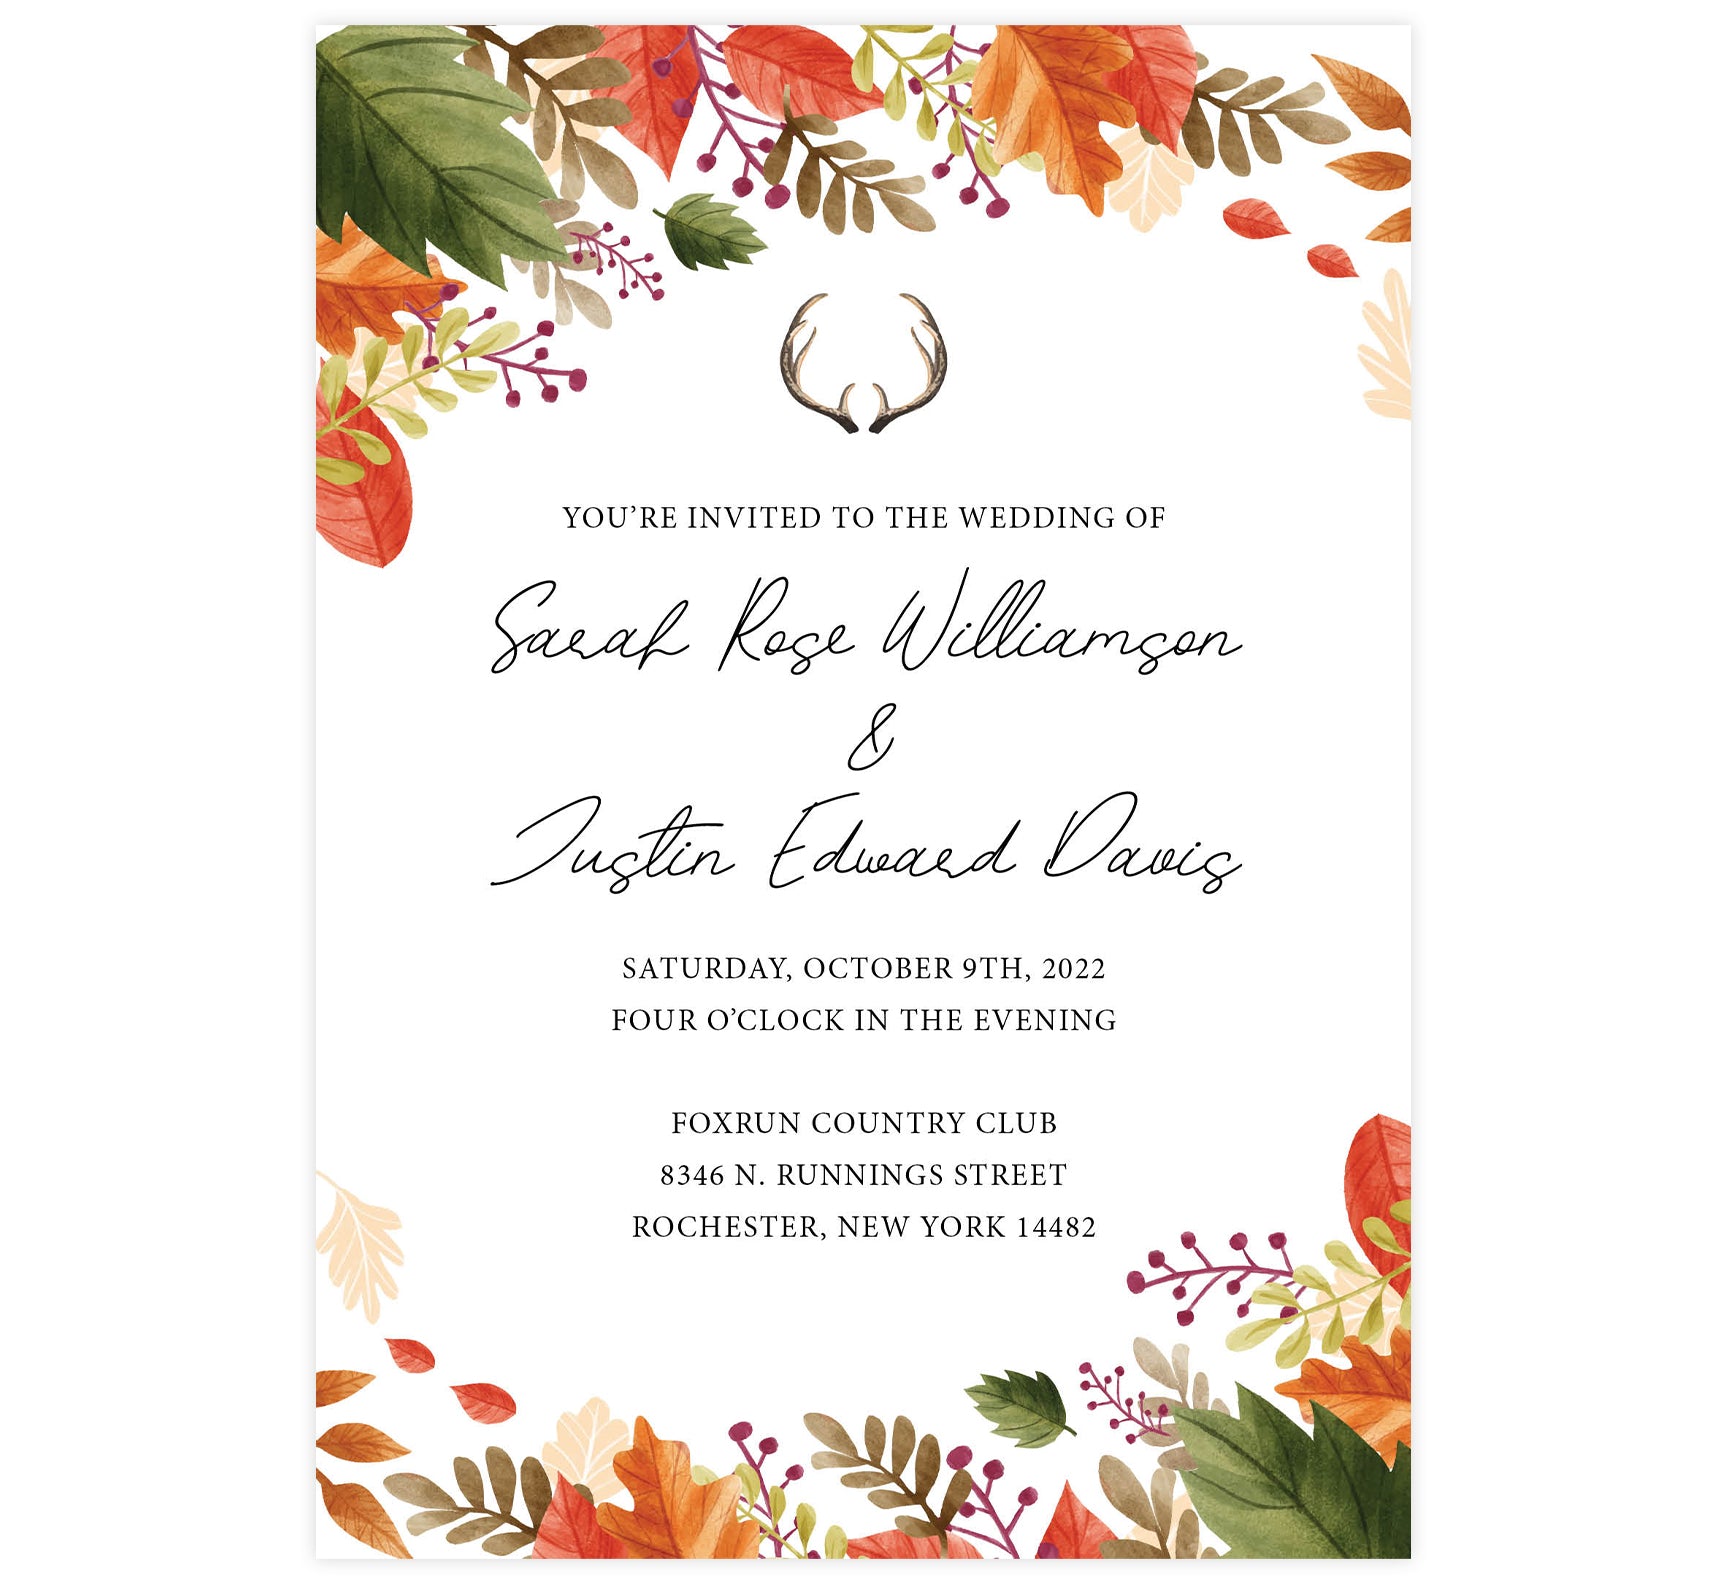 Rustic Fall wedding invitation; white background with black text. Fall leaves frame around the invite with deer antlers above the text.